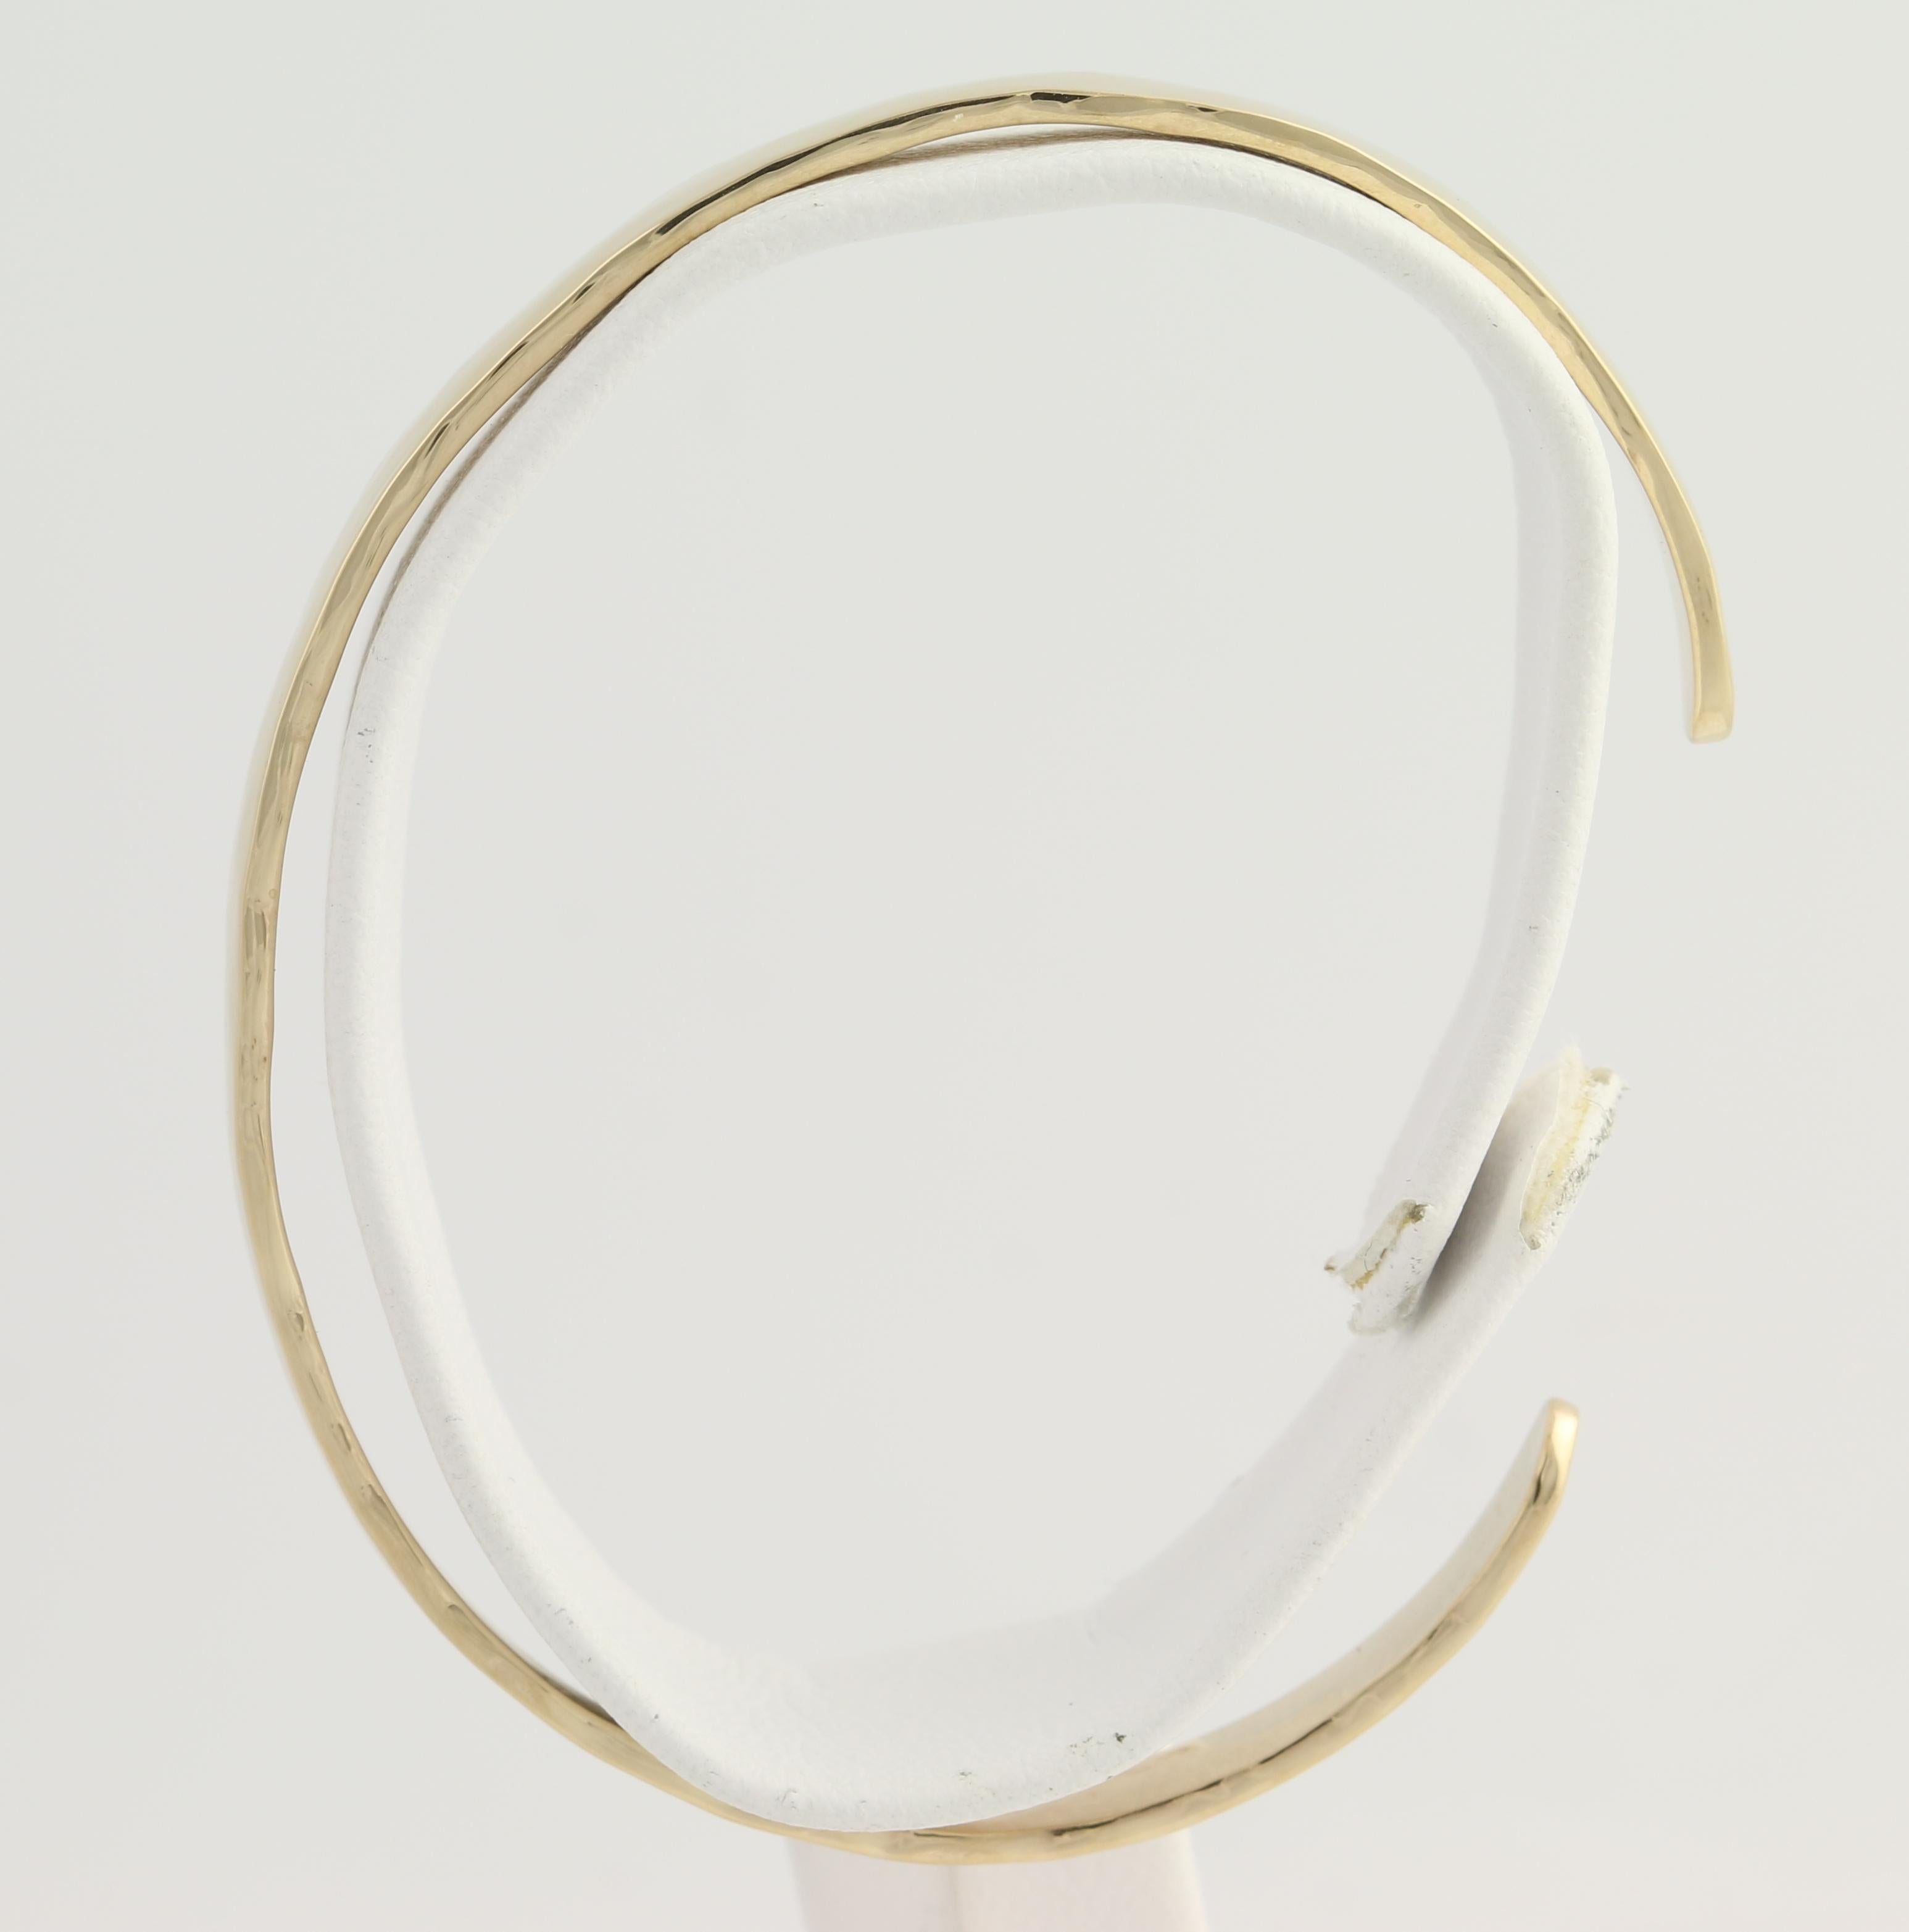 Treat yourself or a special friend to a chic, go-with-anything cuff bracelet! This brand-new piece is handmade from 14k yellow gold and the hammered surface is polished so that the cuff draws and reflects light with any movement. Solid in